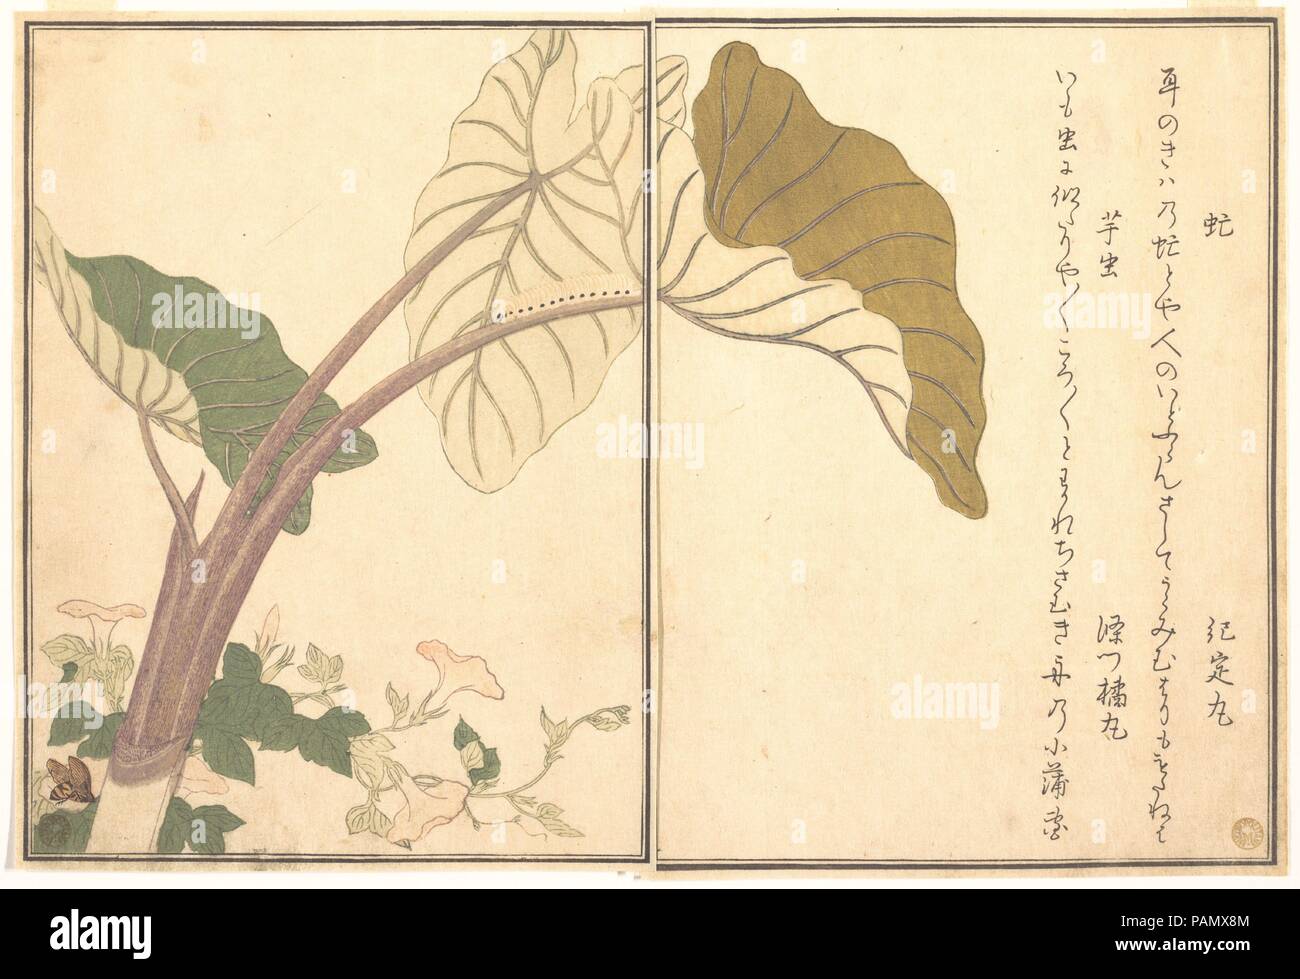 Horsefly (abu); Green Caterpillar, imomushi, from the Picture Book of Crawling Creatures (Ehon mushi erami). Artist: Kitagawa Utamaro (Japanese, ca. 1754-1806). Culture: Japan. Dimensions: 10 1/2 x 7 7/32 in. (26.7 x 18.4 cm). Date: 1788.  Ehon mushi erami (Picture Book of Crawling Creatures) is illustrated with fifteen designs of insects and other garden creatures by Utamaro. Published by Tsutaya Juzaburo , the poems were selected and introduced by a preface written by the poet and scholar Yadoya no Meshimori (Rokujuen; 1753-1830), who later became head of the influential Go-gawa poetry group Stock Photo